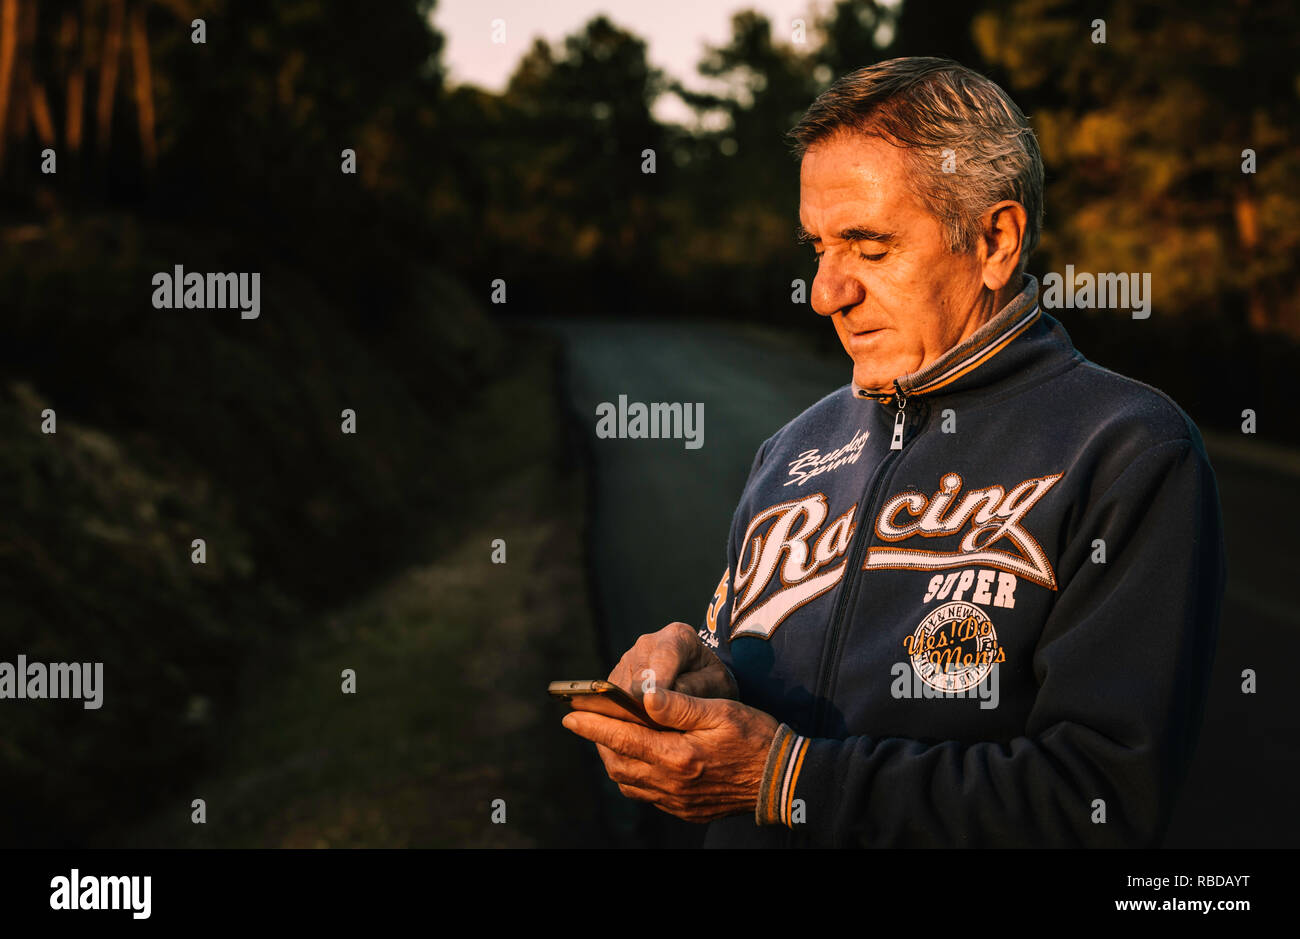 Handsome senior man using smartphone on the side of the road Stock Photo